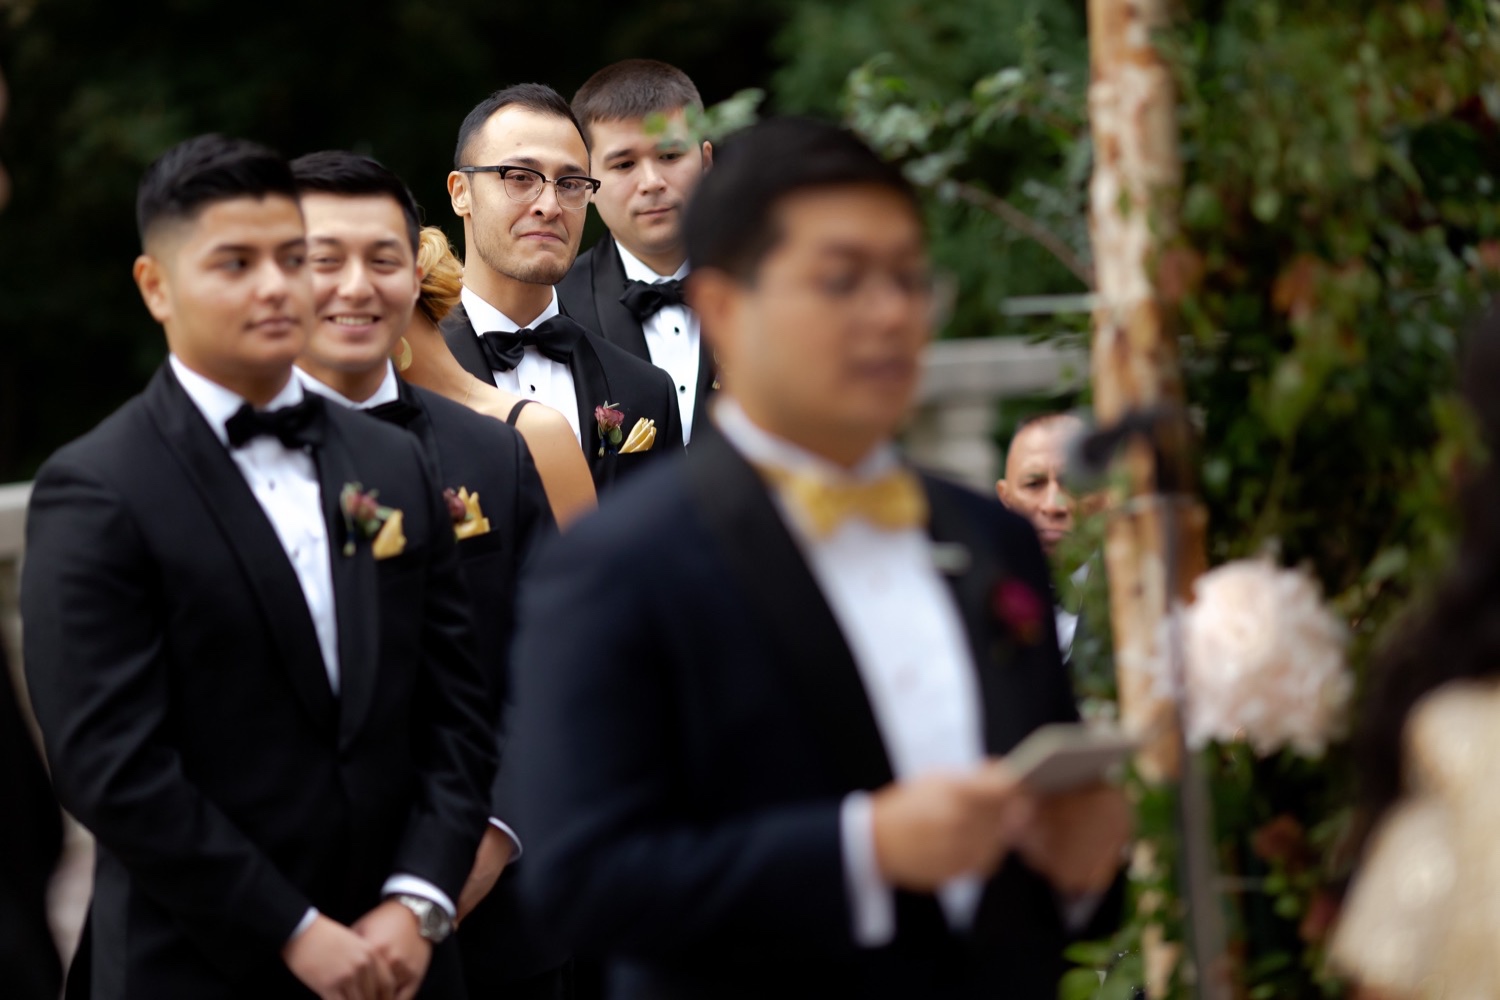 Groomsmen listening to their groom's wedding vow during a wedding ceremony at the Tappan Hill Mansion. 